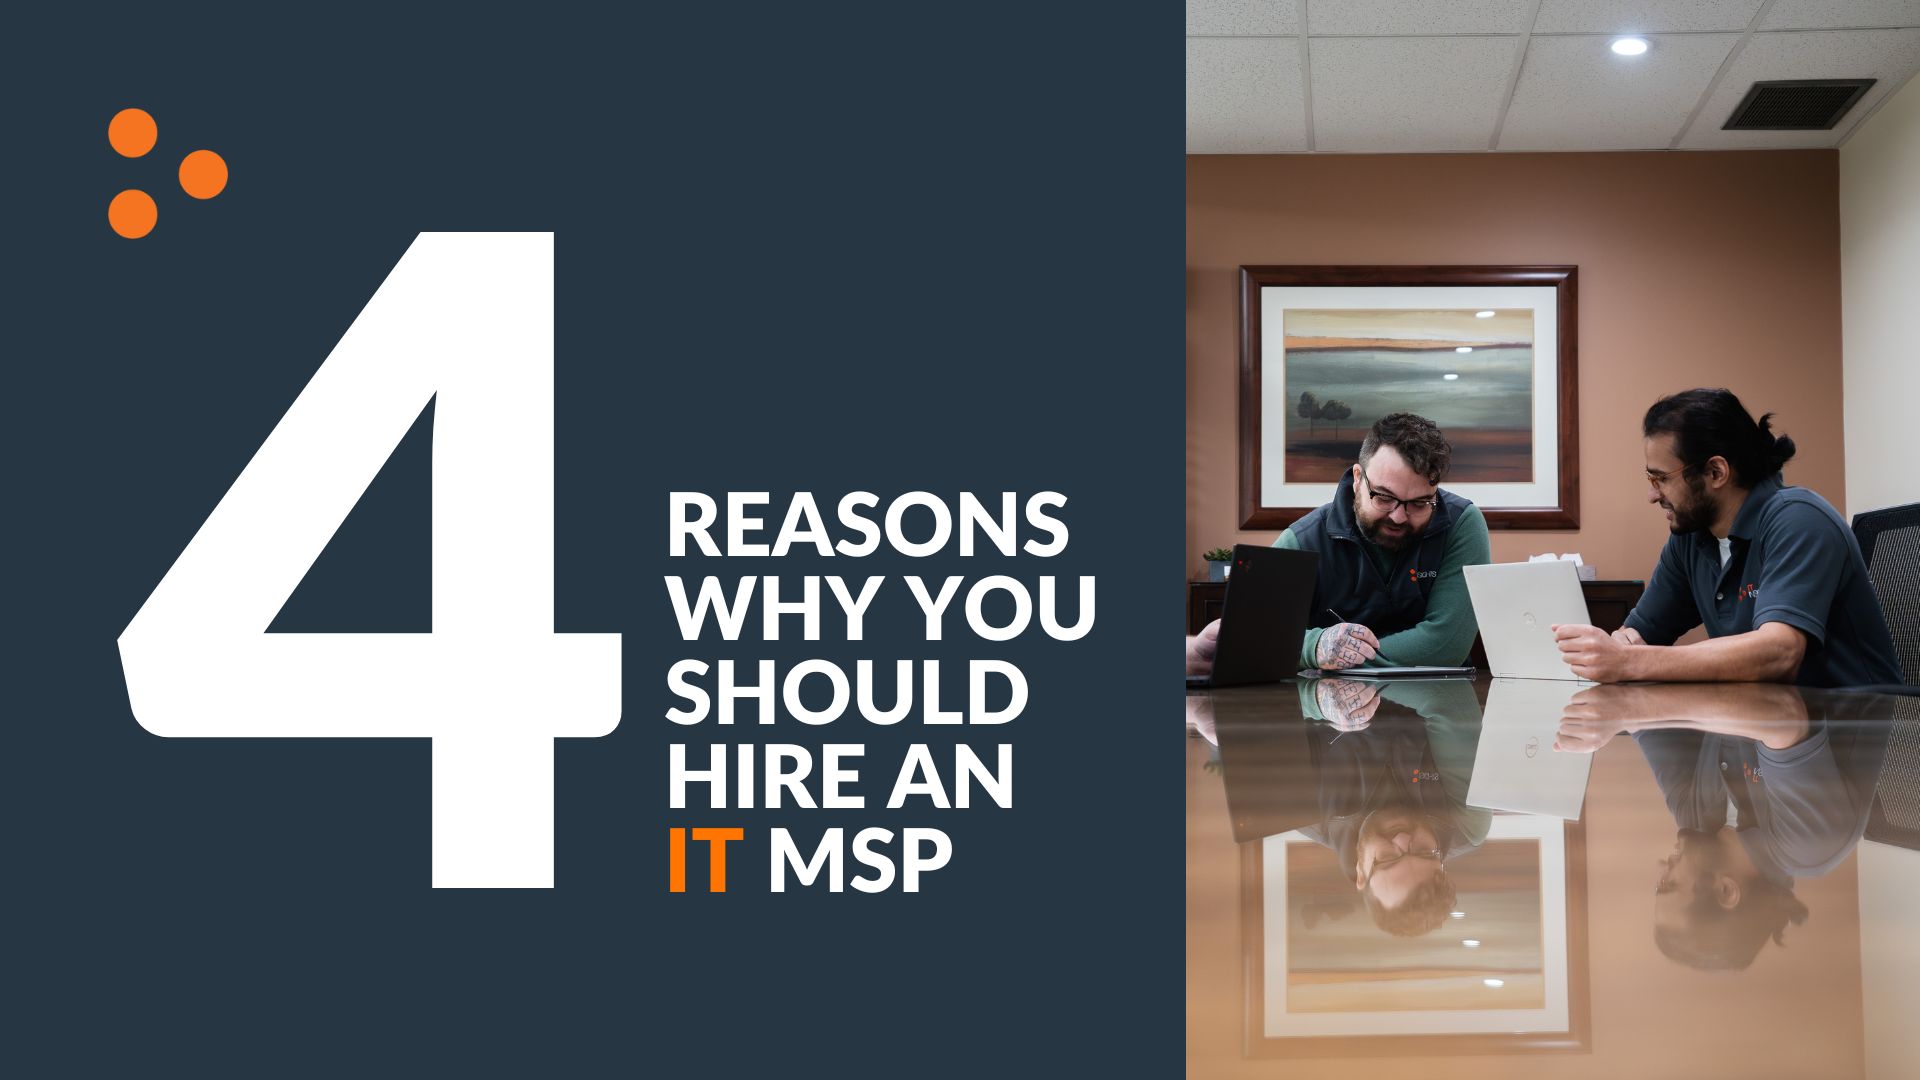 4 Reasons Why You Should Hire an IT MSP